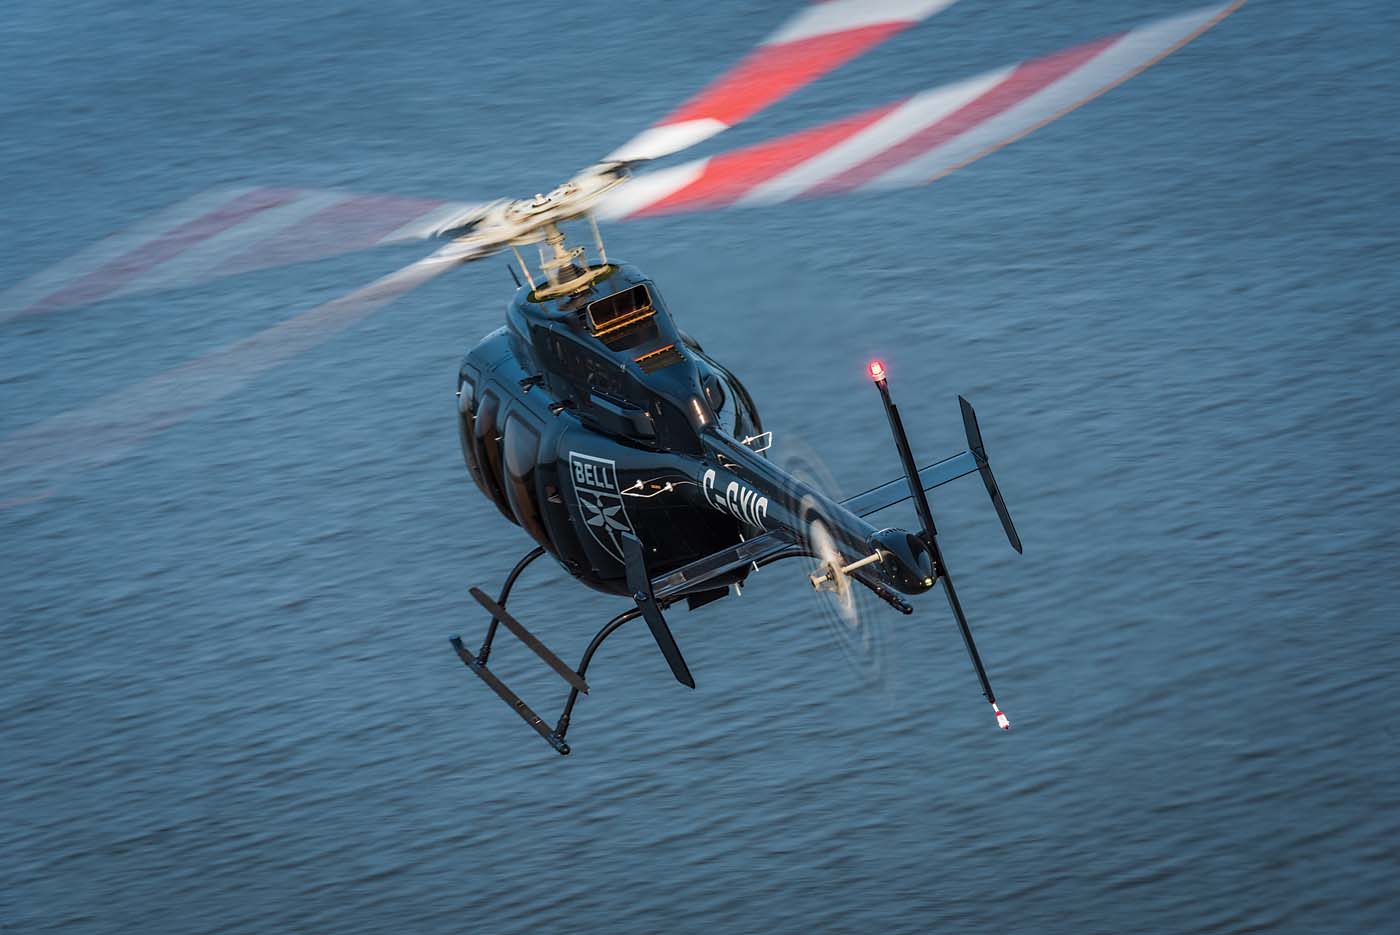 The Bell 407GXi utilizes the latest variant of the Rolls-Royce M250 engine, which comes with a dual channel full authority digital engine control (FADEC) fuel management system. Peter Handley Photo